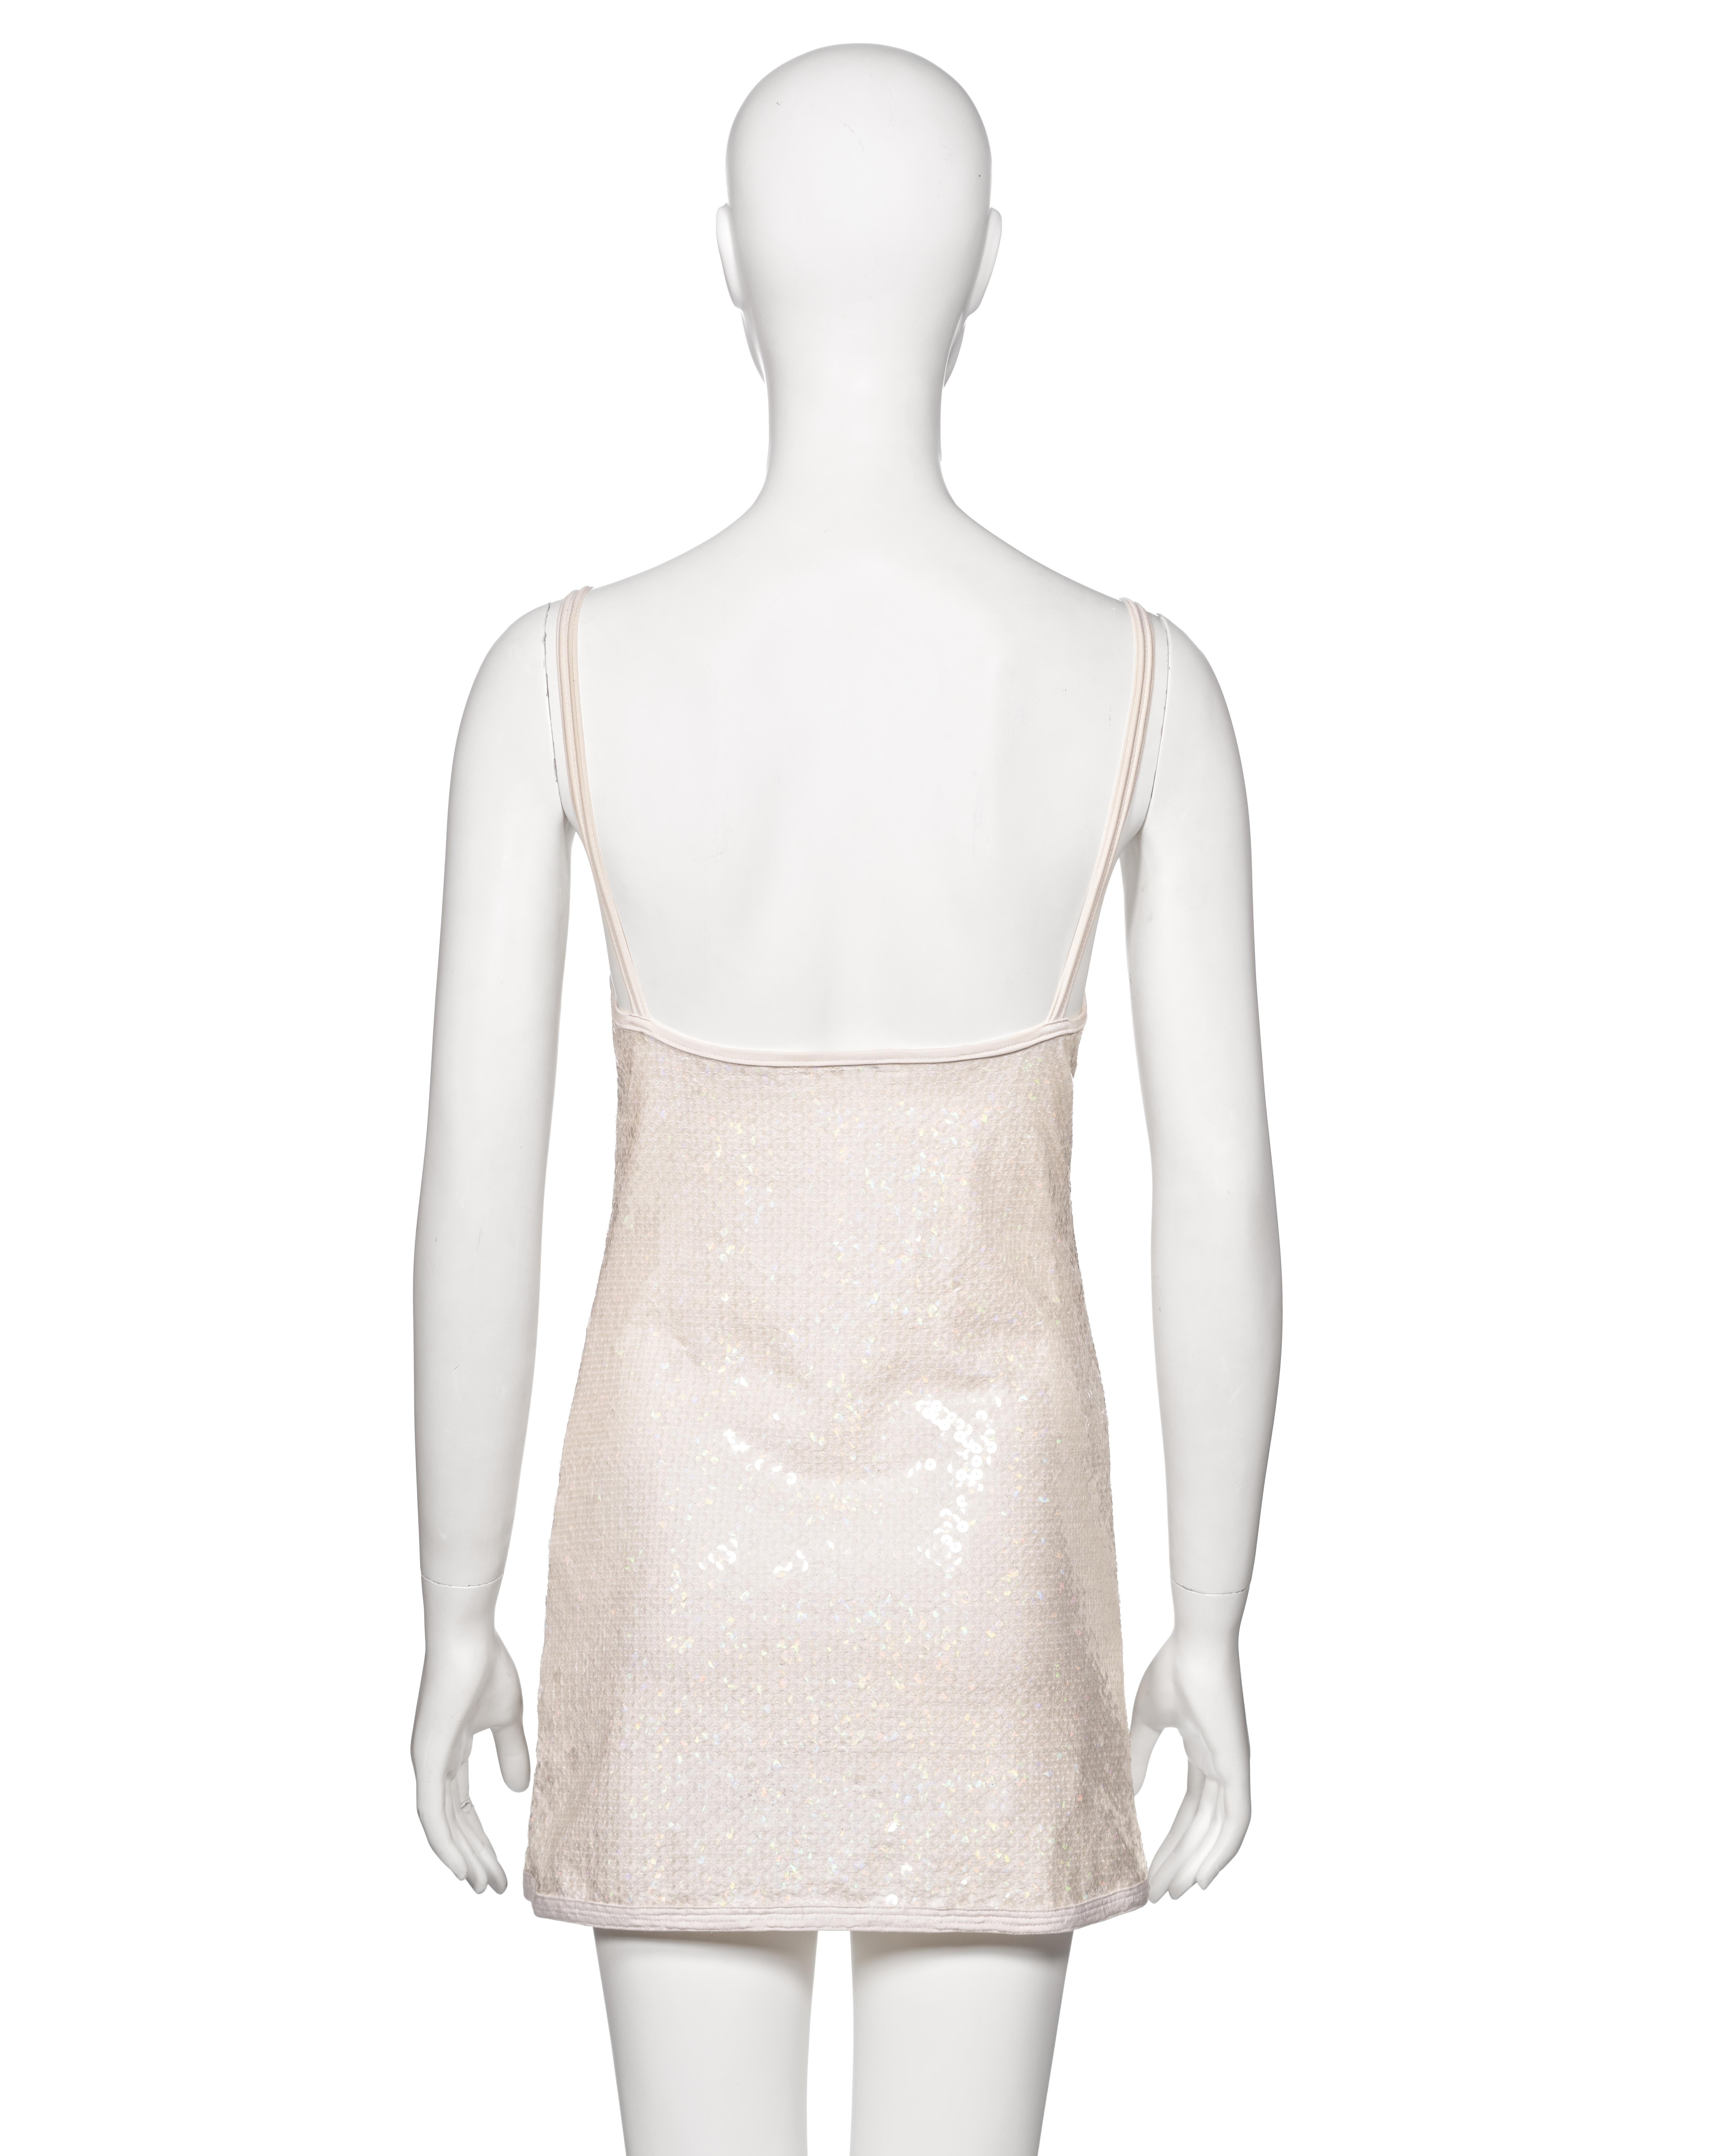 Chanel by Karl Lagerfeld White Iridescent Sequin Mini Dress, ss 2005 For Sale 4